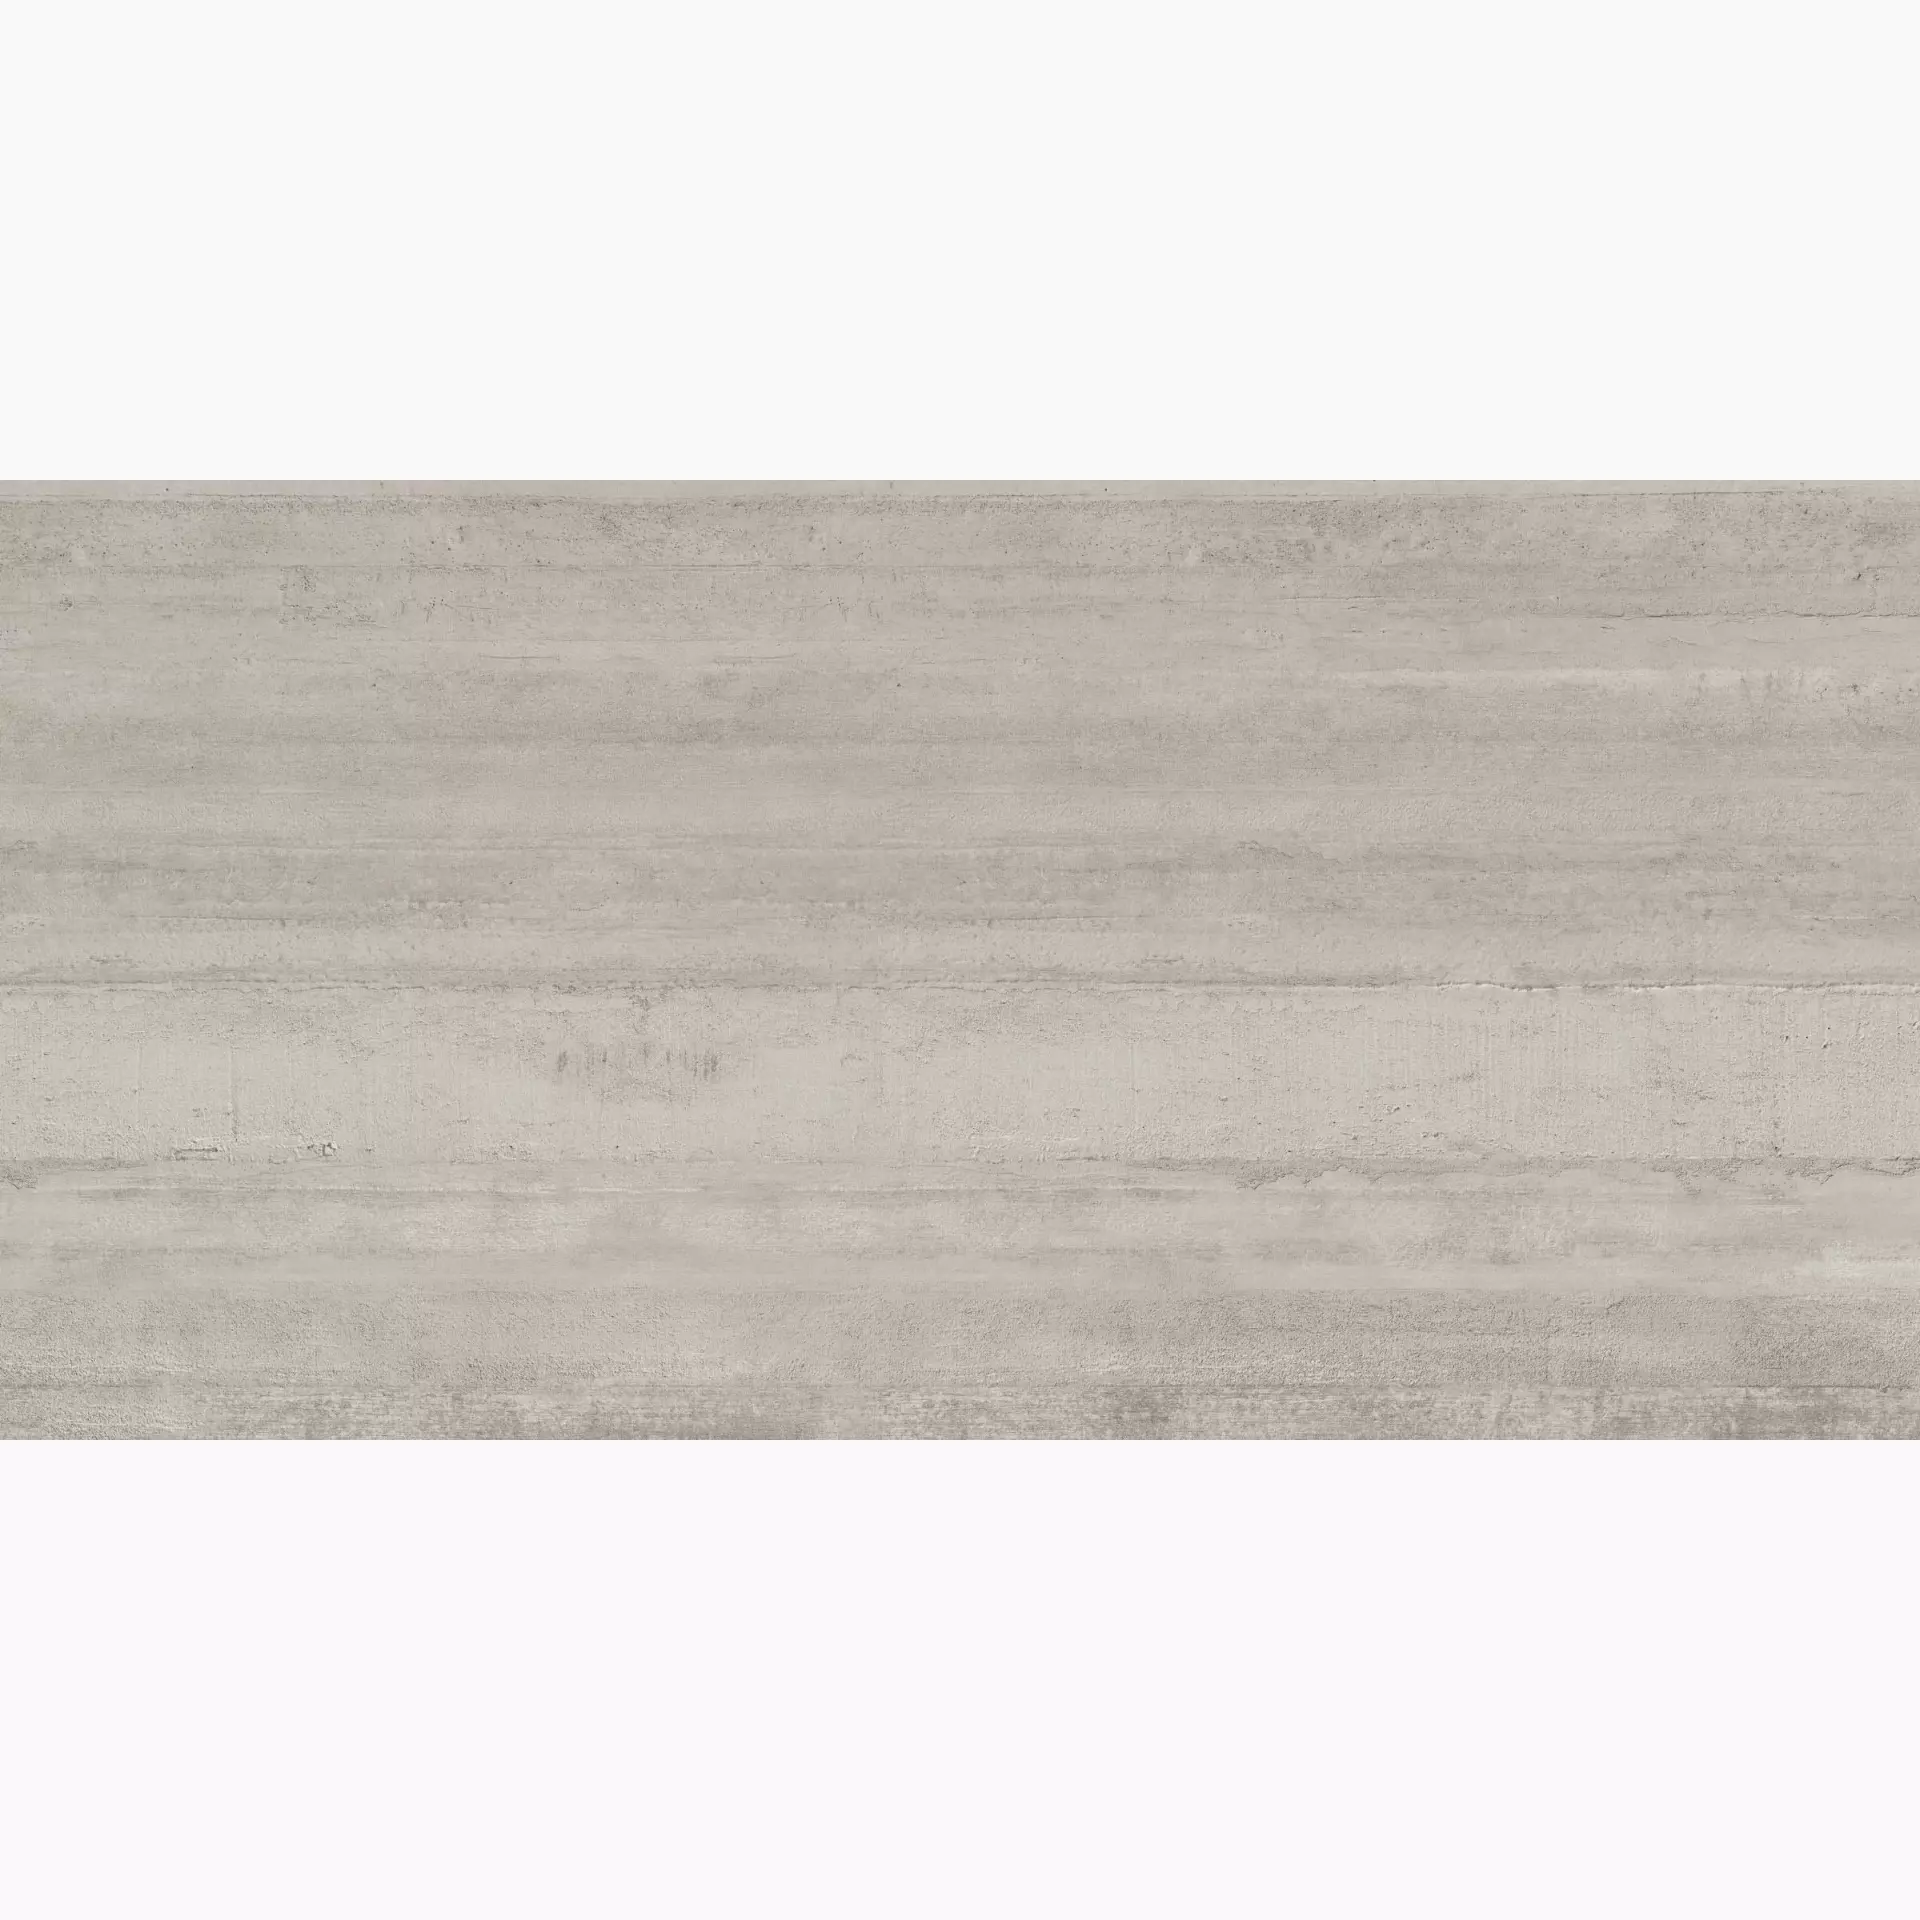 ABK Lab325 Form Ash Naturale PF60002628 60x120cm rectified 8,5mm